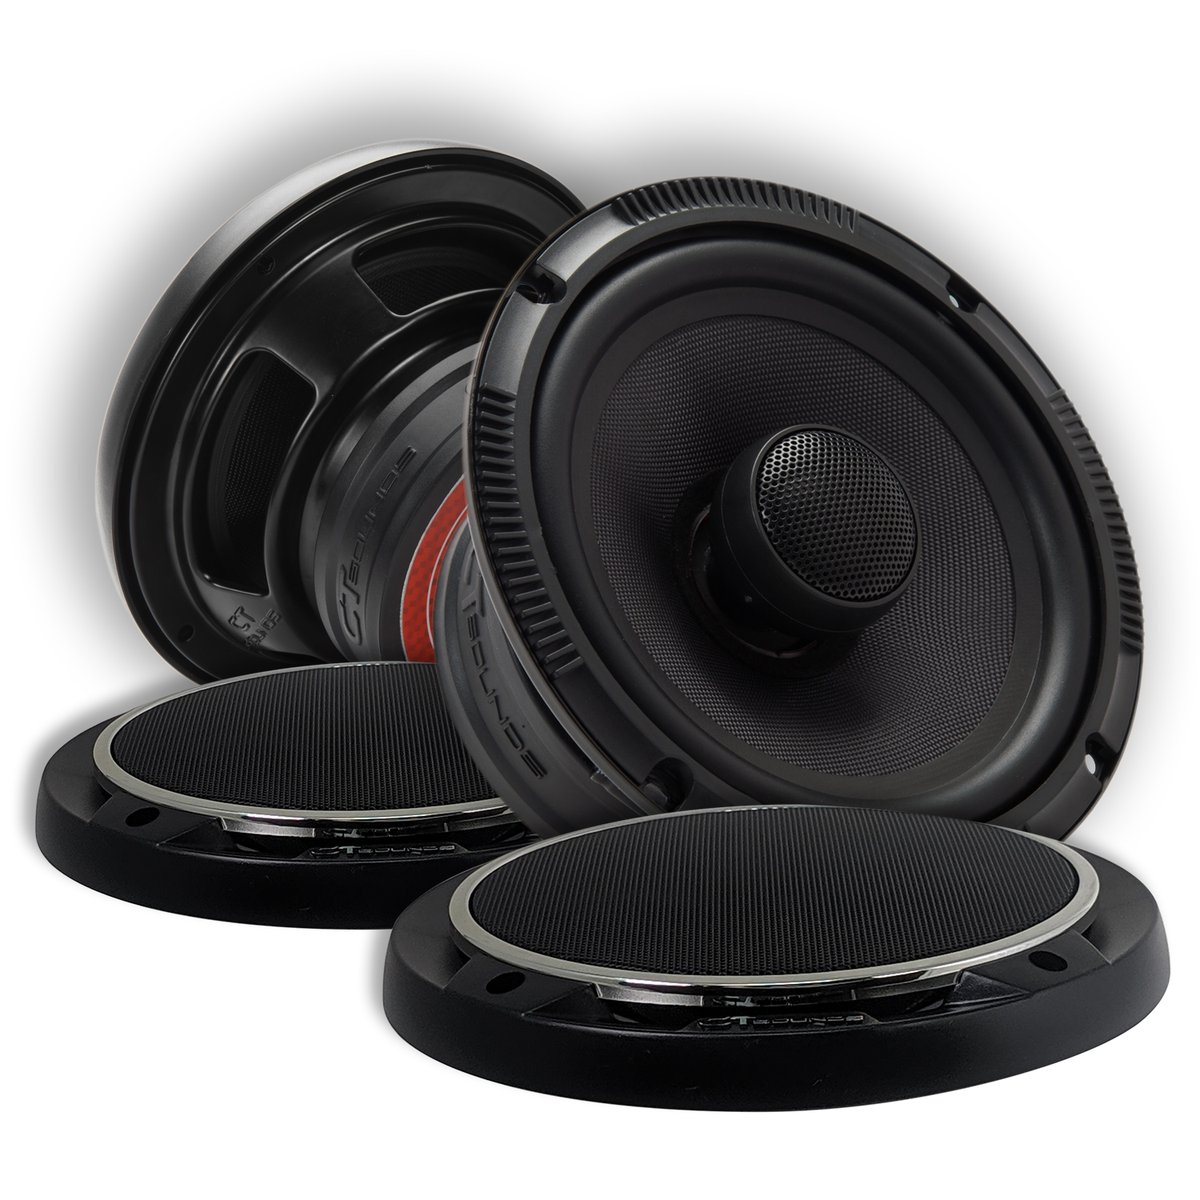 Buy CT Sounds 3.5 Inch 3-Way Car Audio Midrange Speakers – Meso Speakers  with Grills, Resonant frequency of 65 Hz, 30W (RMS) | 60W (MAX) Power Per  Speaker, Sold in Pairs Online in Taiwan. B01N7UXBLE